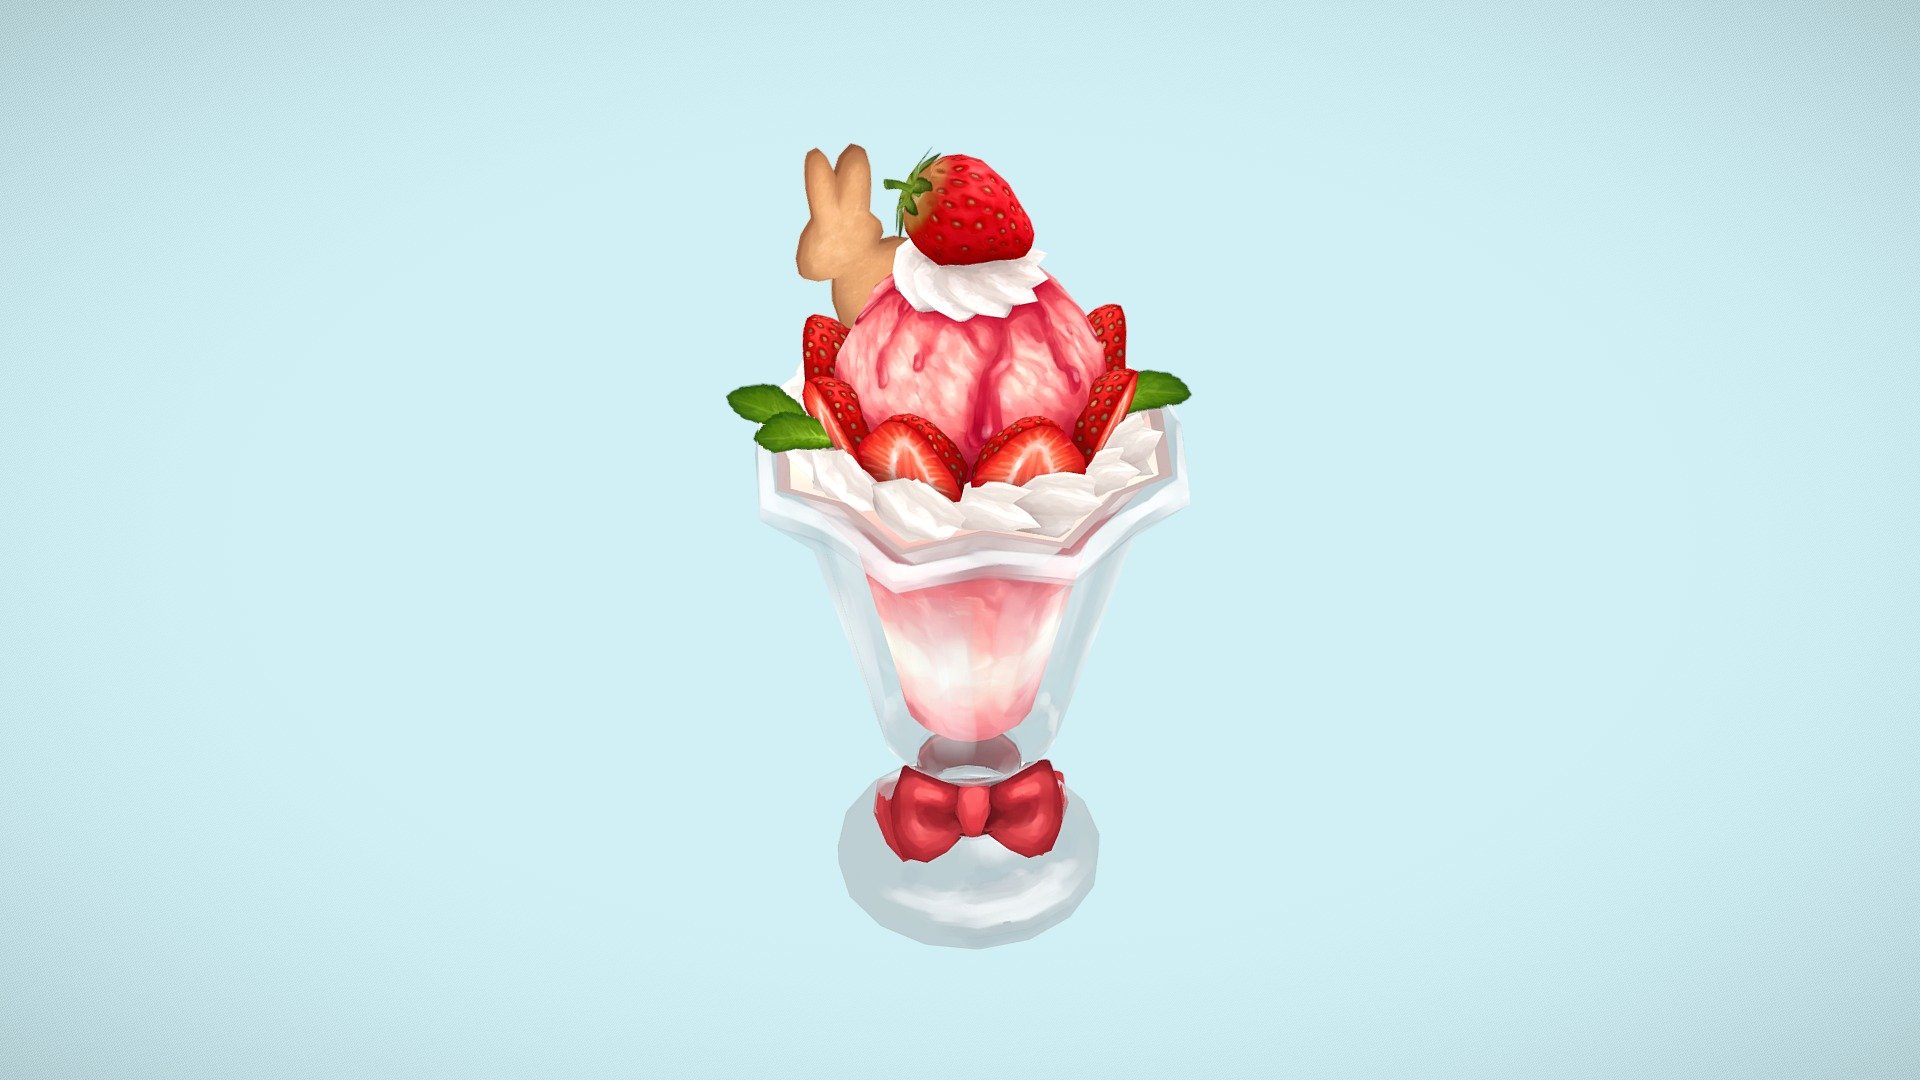 A tasty strawberry Parfait! I designed it, made with Maya, and  painted  textures with Clip studio Paint. I had a lot of fun with this! - Parfait - 3D model by April Amalfitano (@aoiskye) 3d model